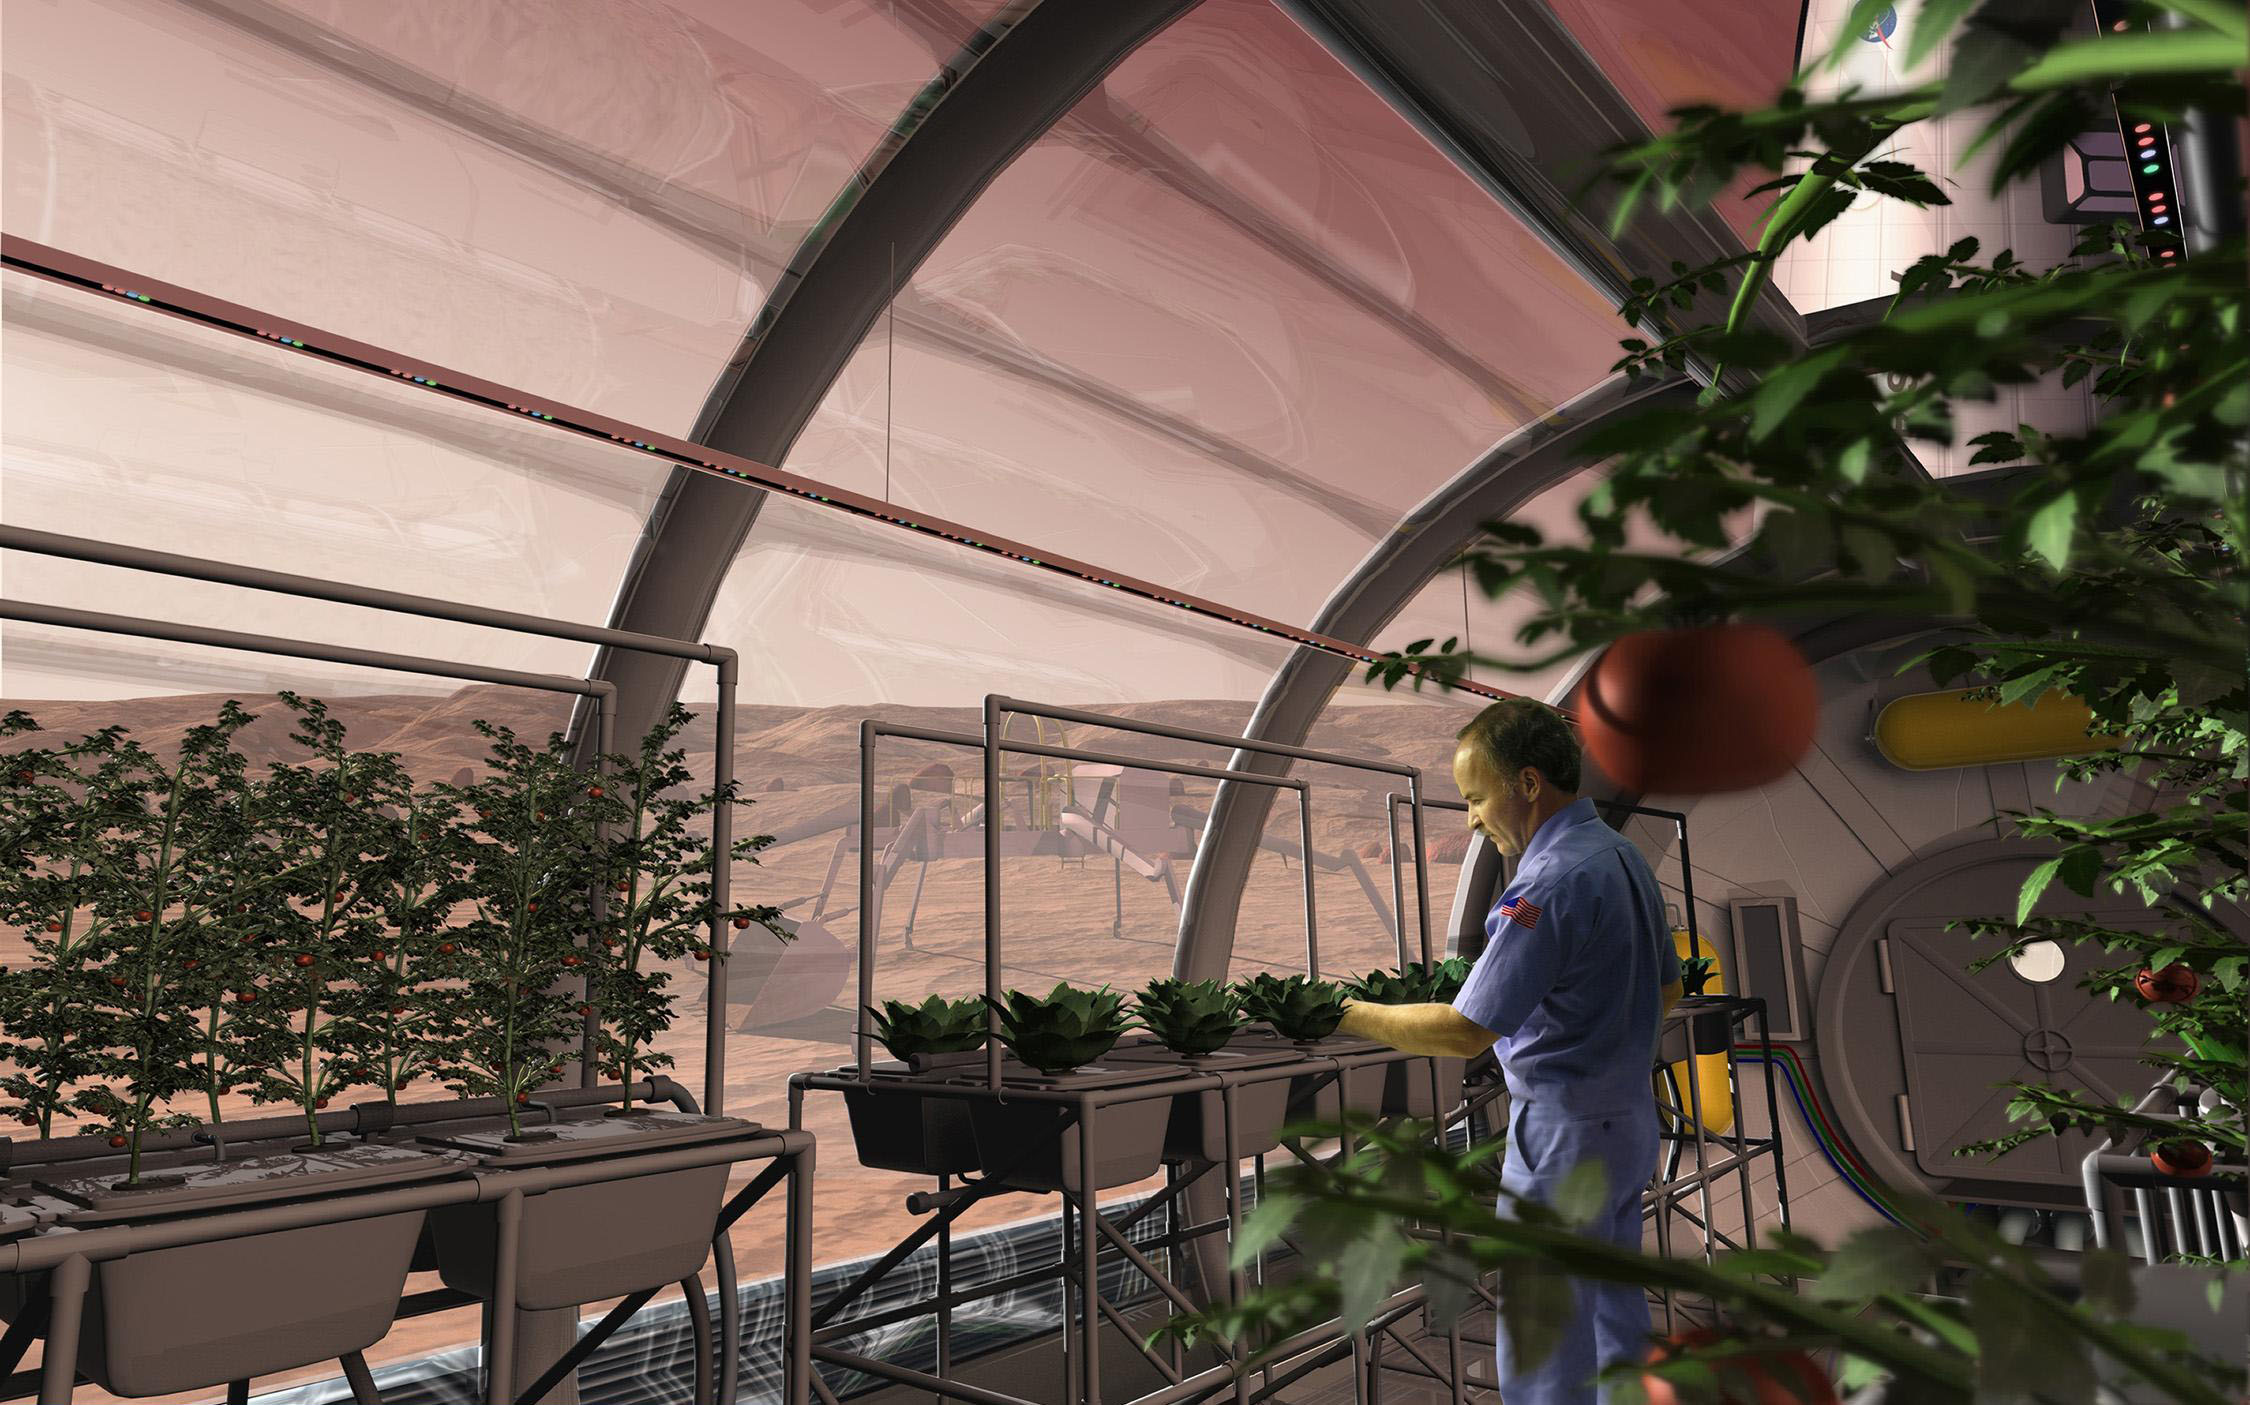 Crops Grow On Fake Moon And Mars Soil